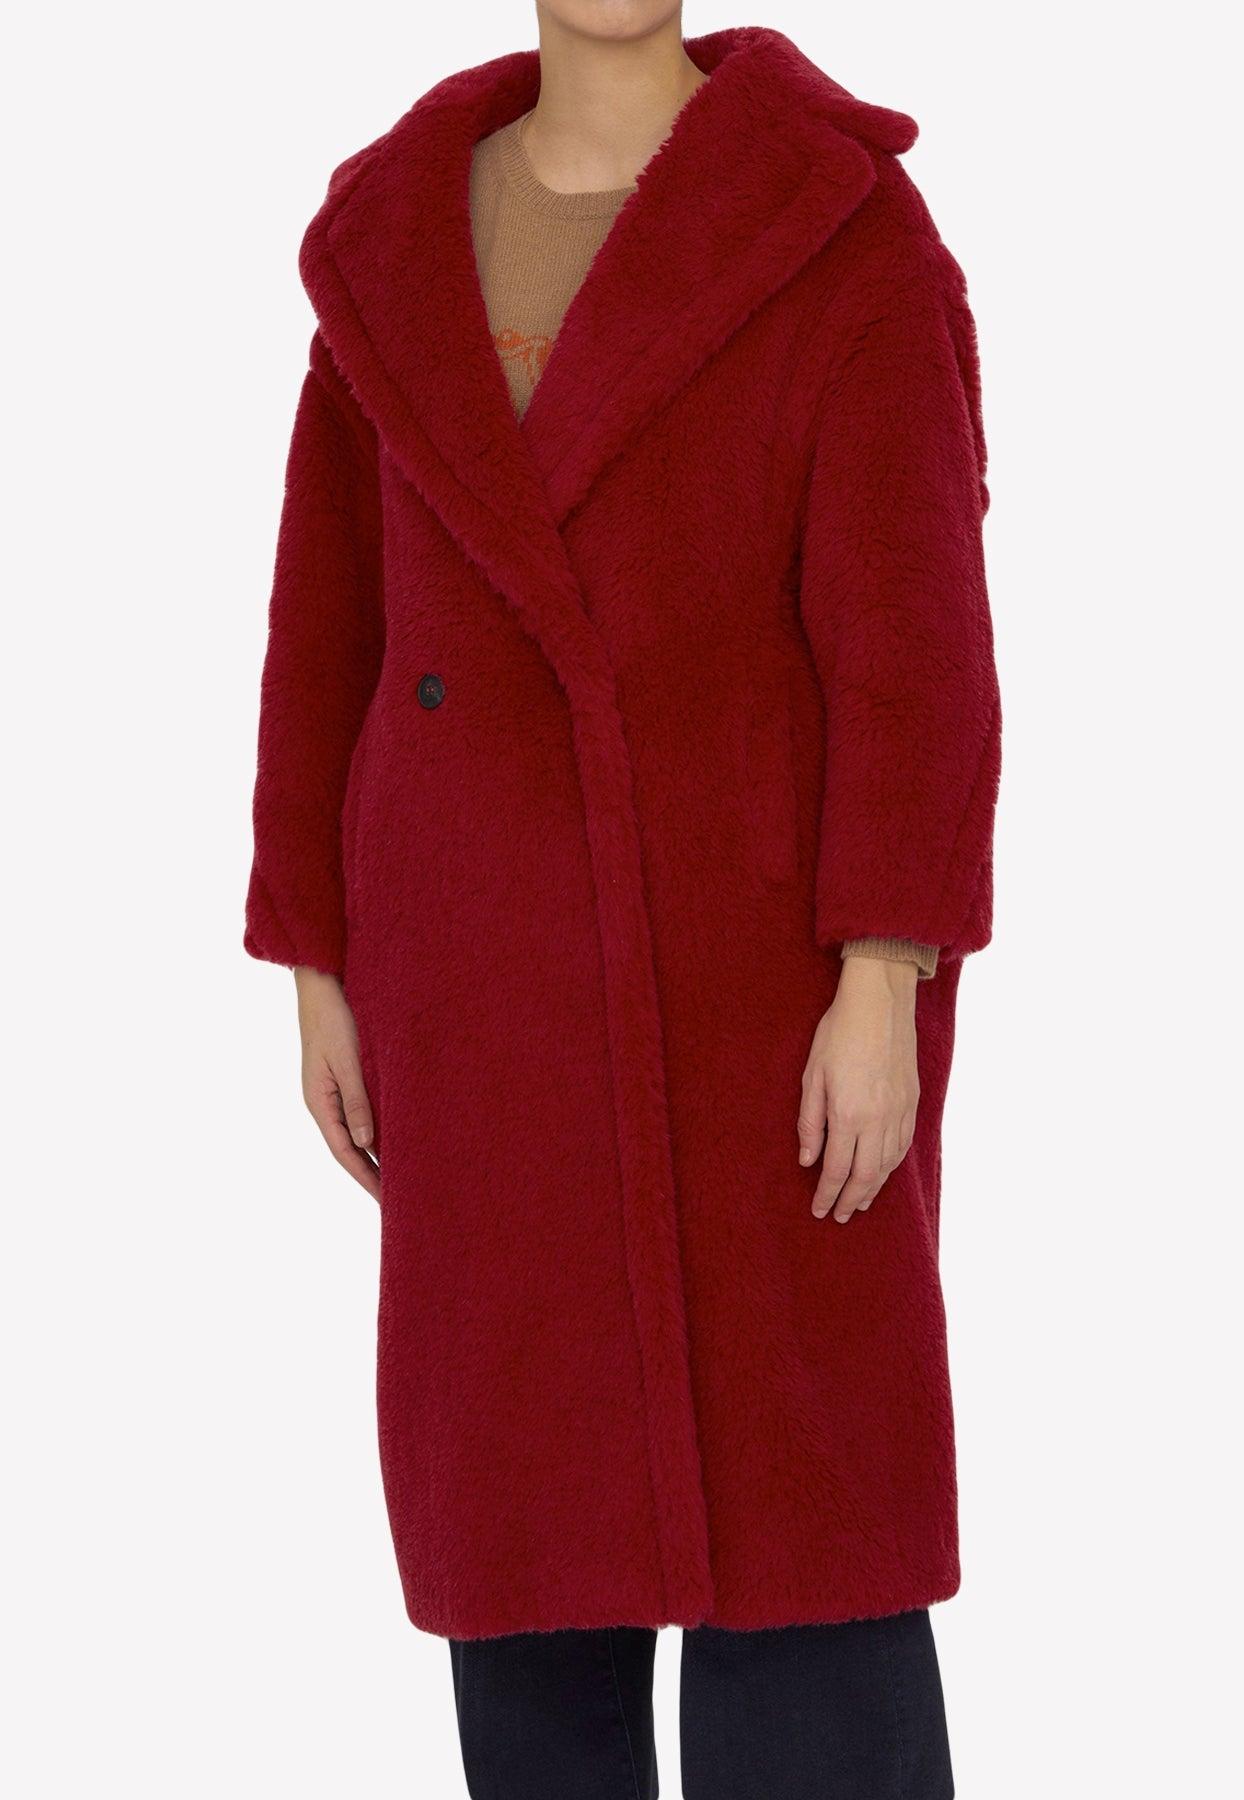 Max Mara Teddy Bear Double-breasted Coat in Red | Lyst